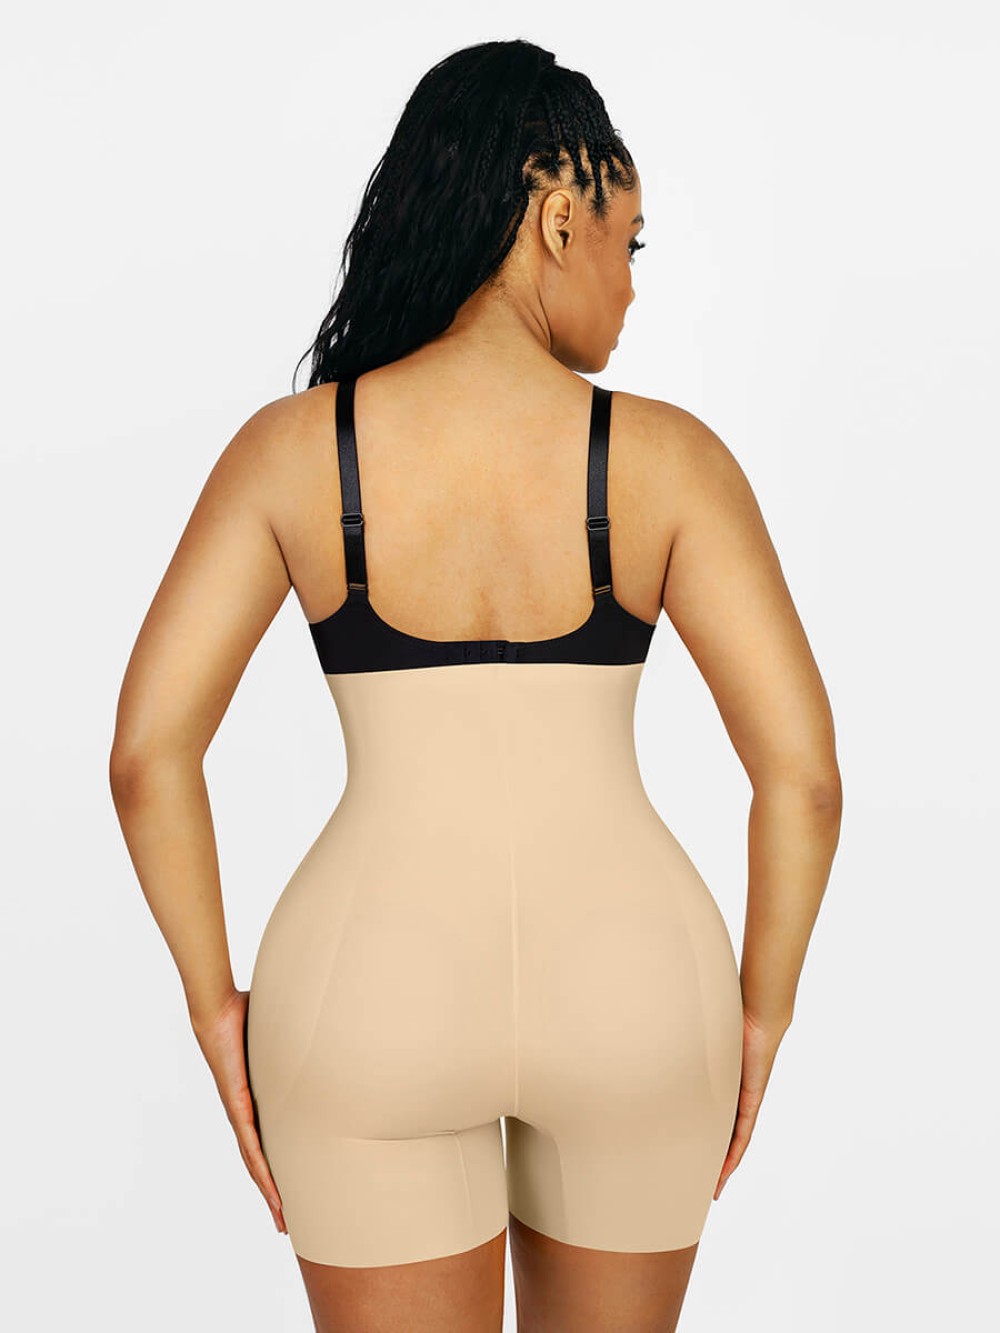 High Waist Butt Lifter Body Shaping Pants With Removable Buttock Pads